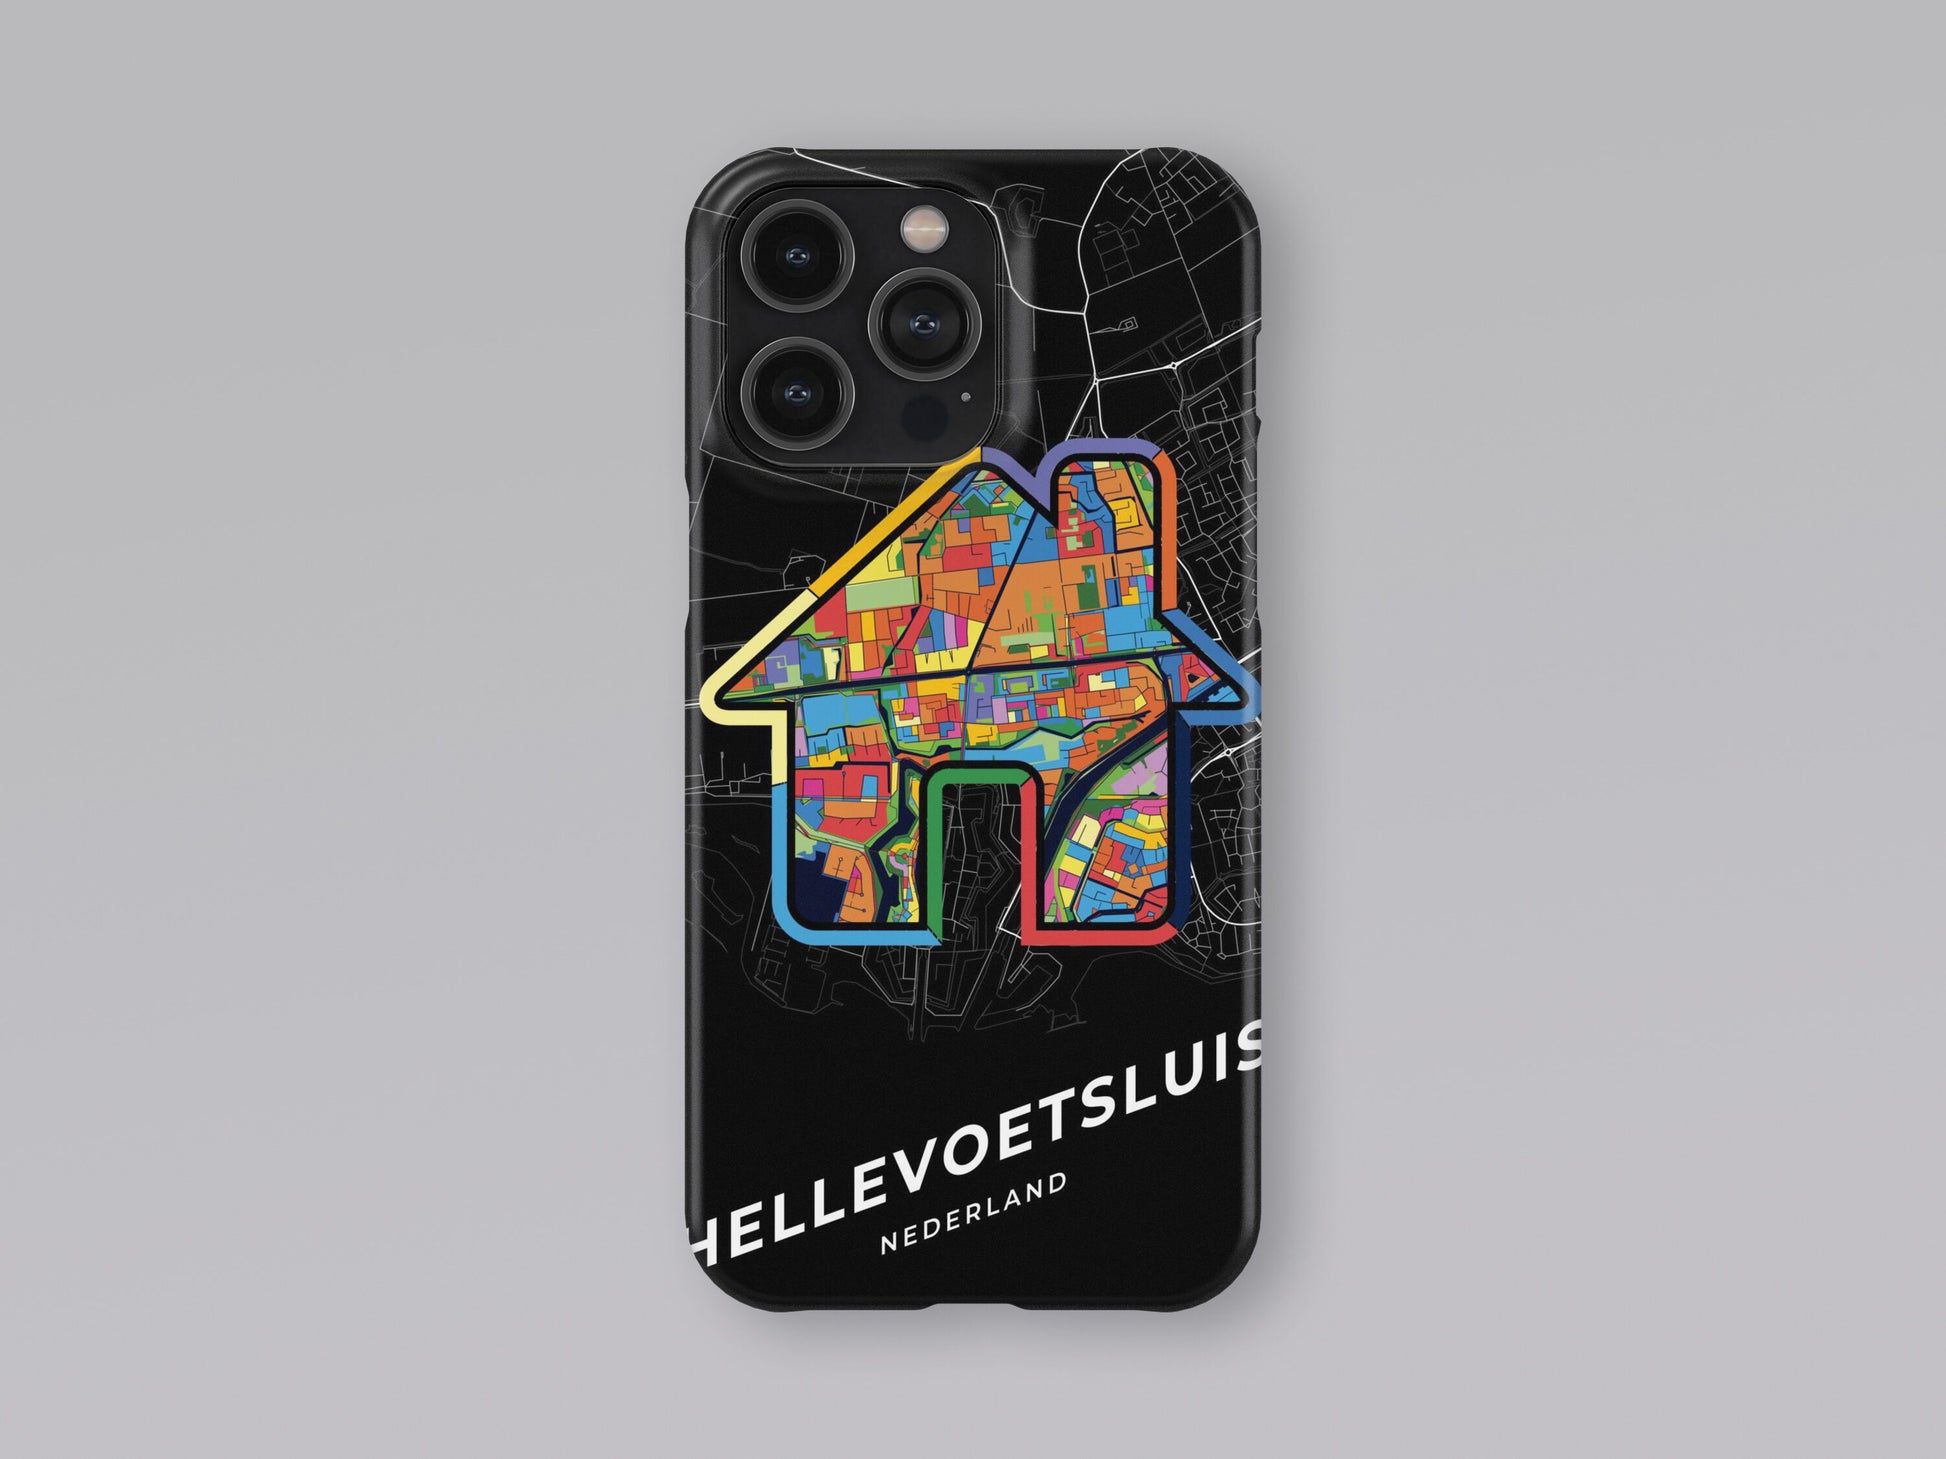 Hellevoetsluis Netherlands slim phone case with colorful icon. Birthday, wedding or housewarming gift. Couple match cases. 3